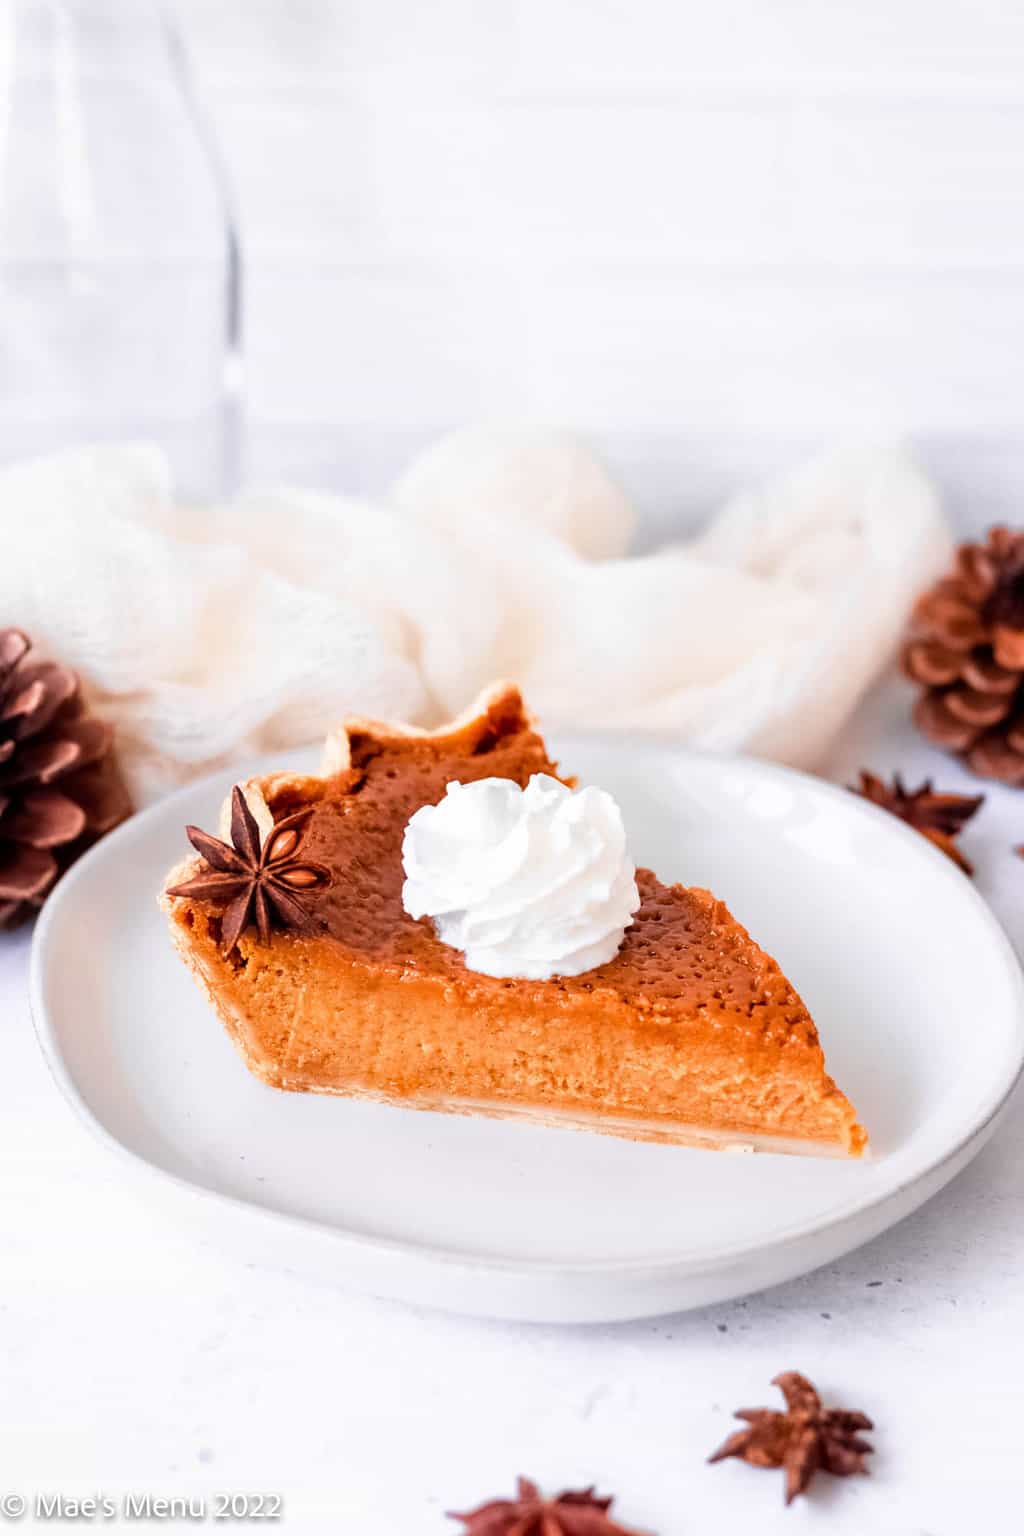 A slice of diary free pumpkin pie on a white dish.